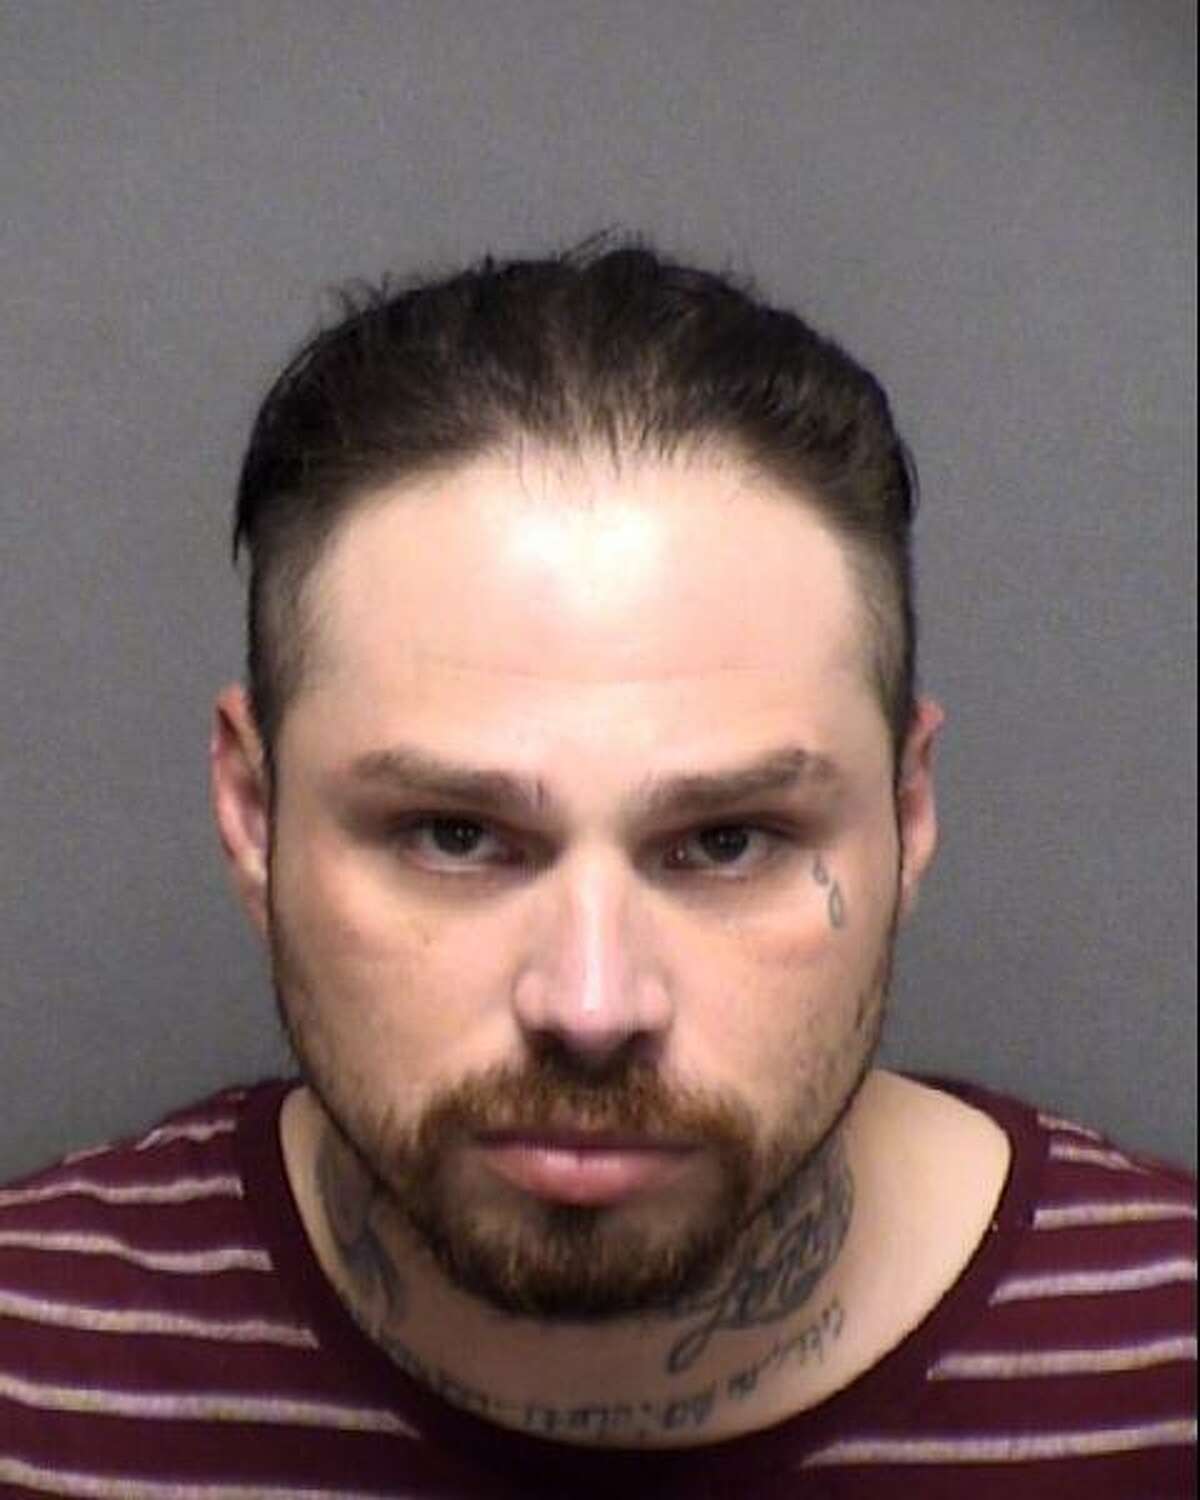 Jon Erik Torres, 35, was arrested Thursday on six warrants, according to court records. He allegedly abducted his girlfriend while they were in a vehicle outside a home in the 12000 block of White Birch Street and assaulted her over three days, Bexar County Sheriff’s Office investigators said.